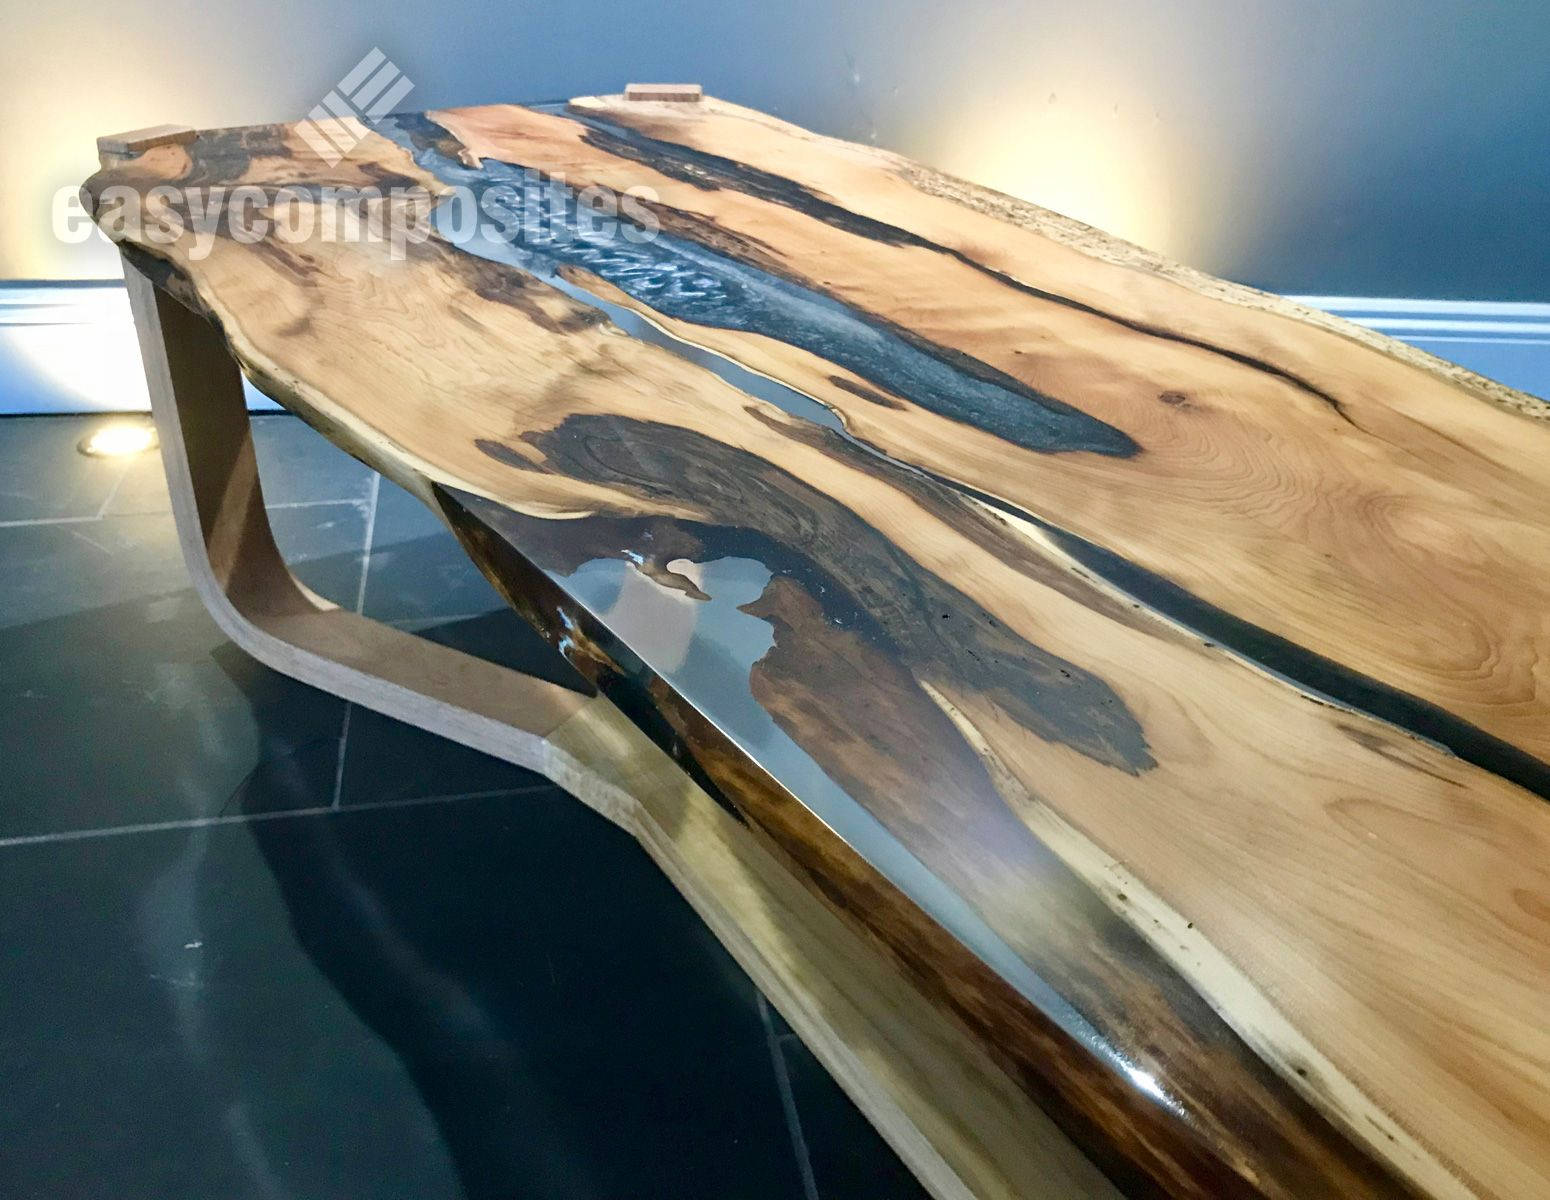  Resin and wood decor, Ambient night light, Resin table lamp,  One of a kind decor, Unique LED night light Resinwood, Wood art functional  art : Handmade Products